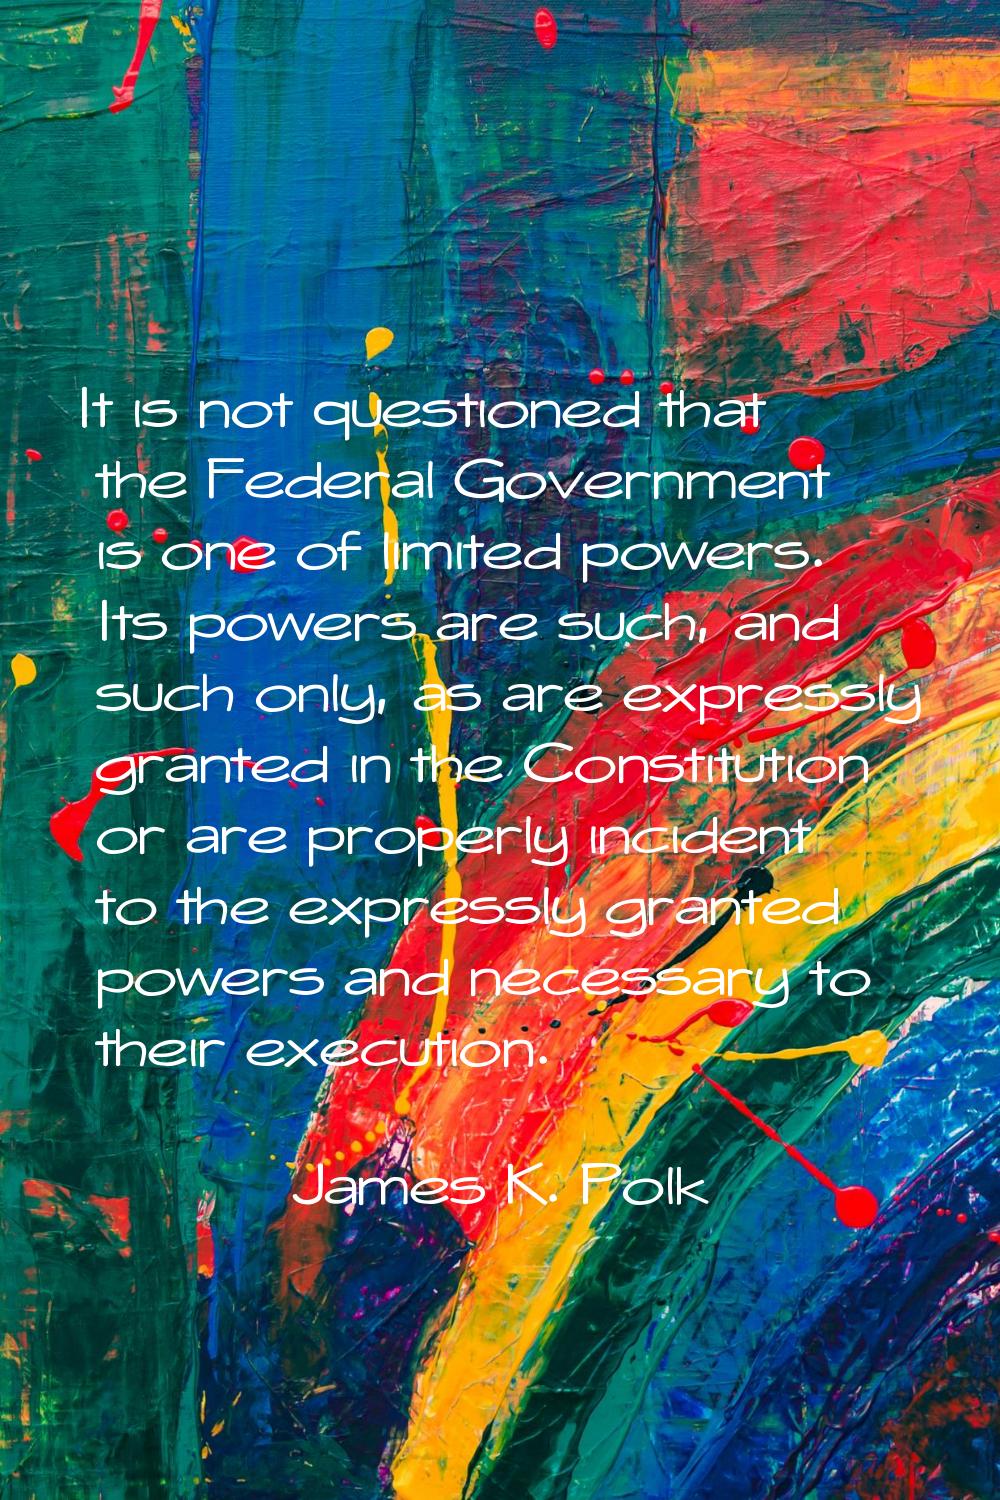 It is not questioned that the Federal Government is one of limited powers. Its powers are such, and